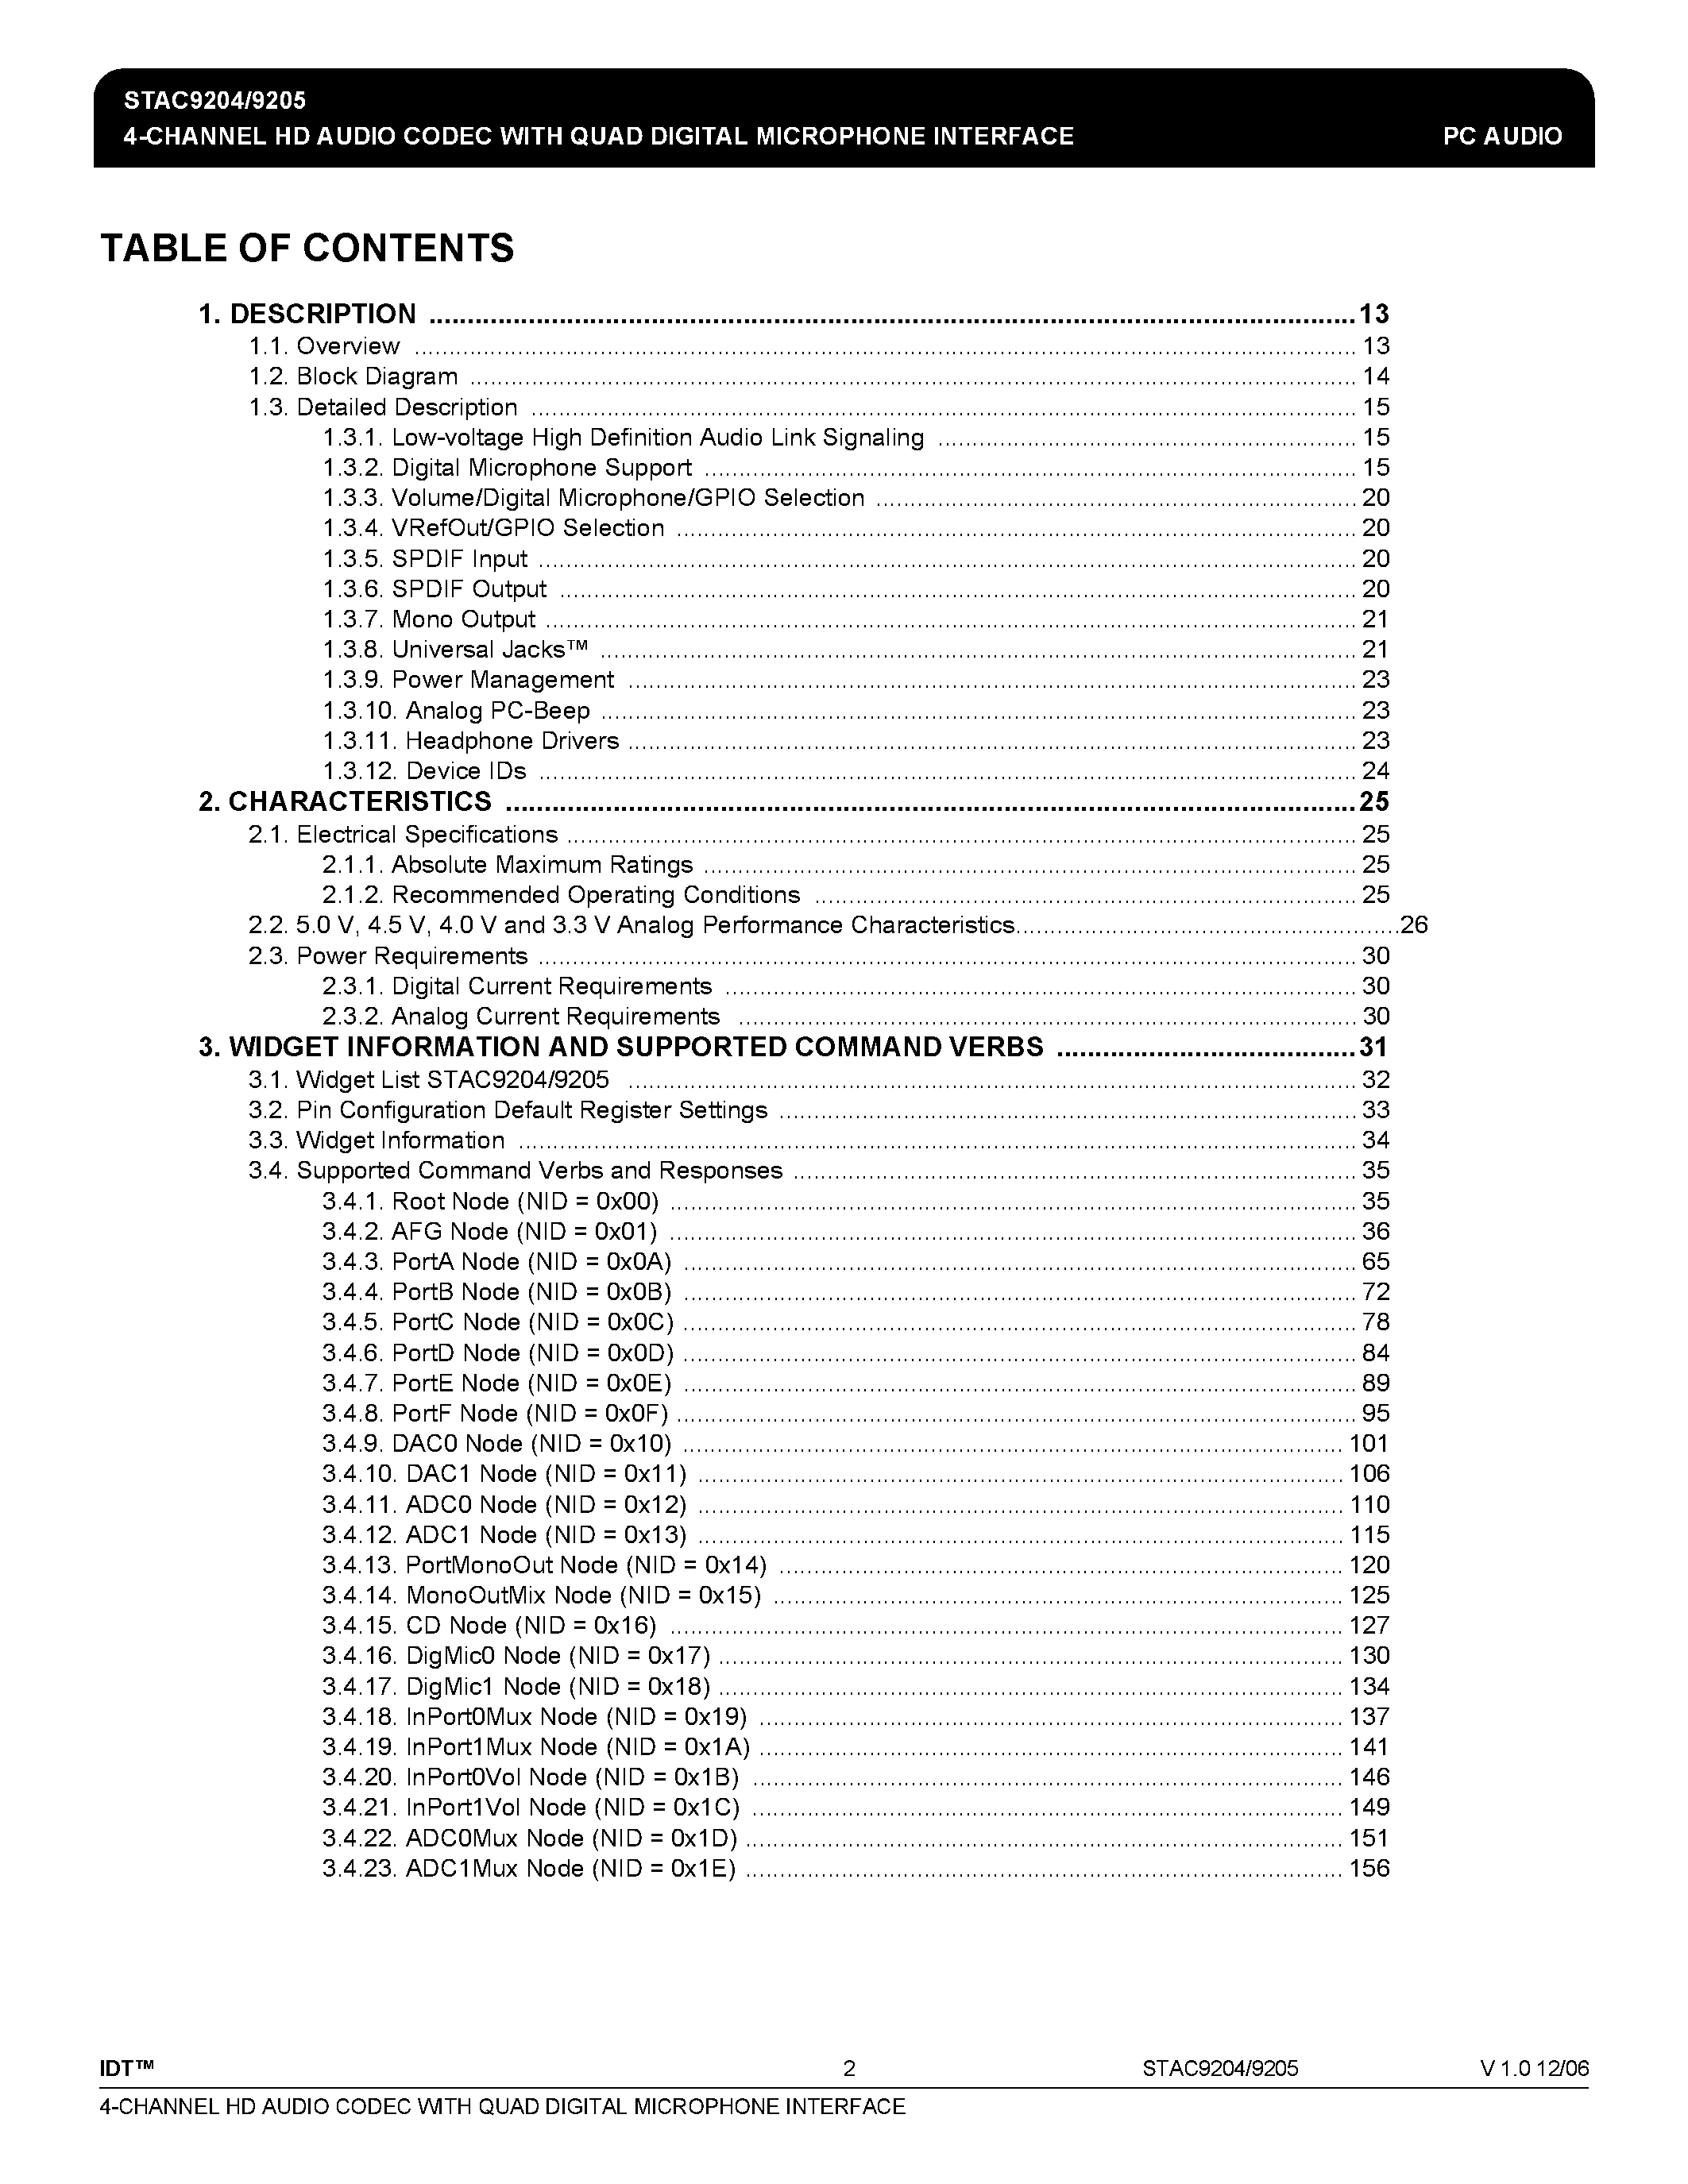 Datasheet STAC9204 - (STAC9204 / STAC9205) 4-CHANNEL HD AUDIO CODEC page 2